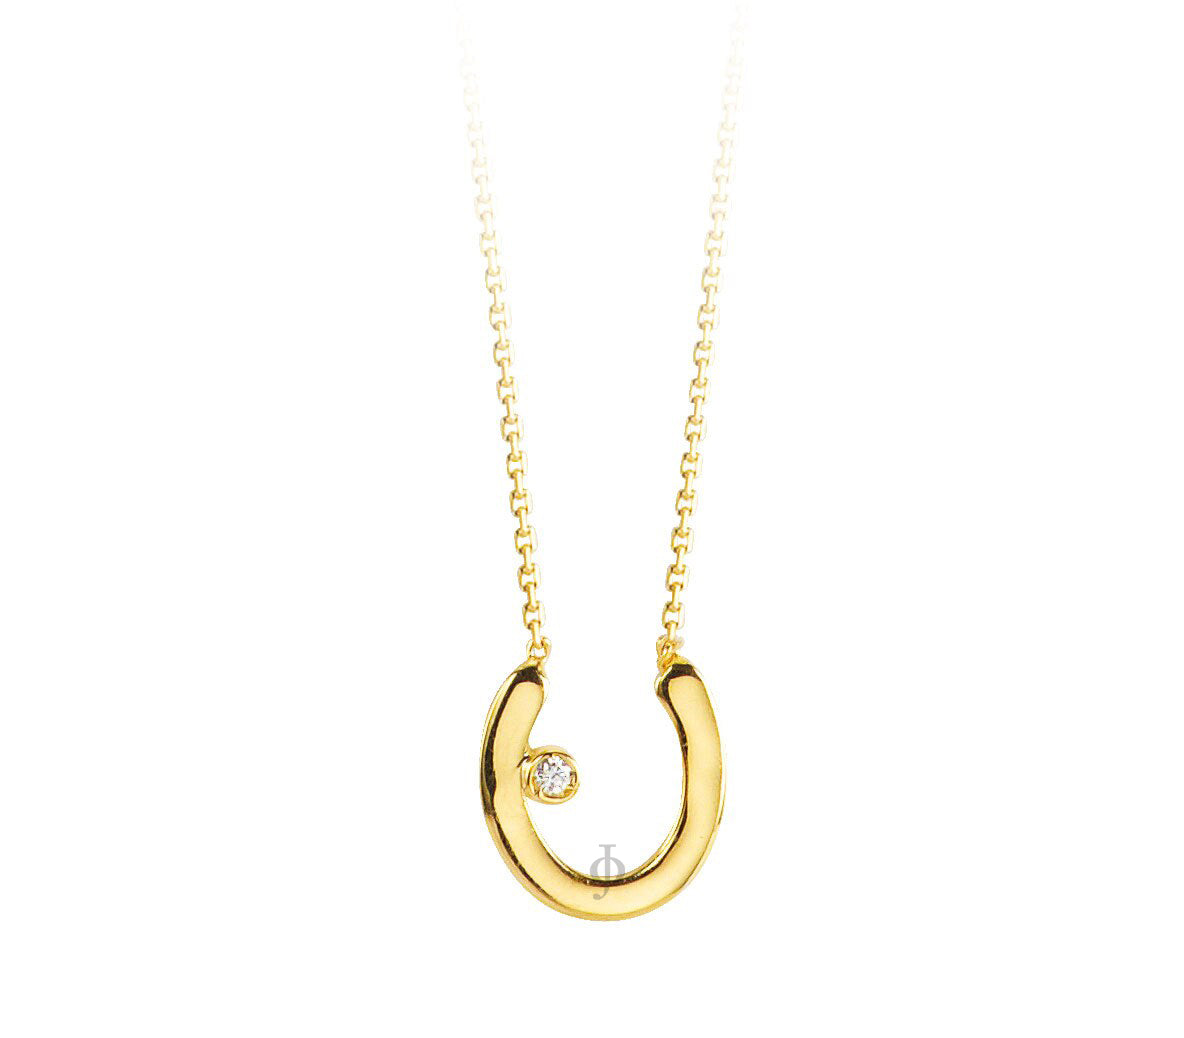 10K Yellow Gold Diamond Horse Shoe Necklace with Chain